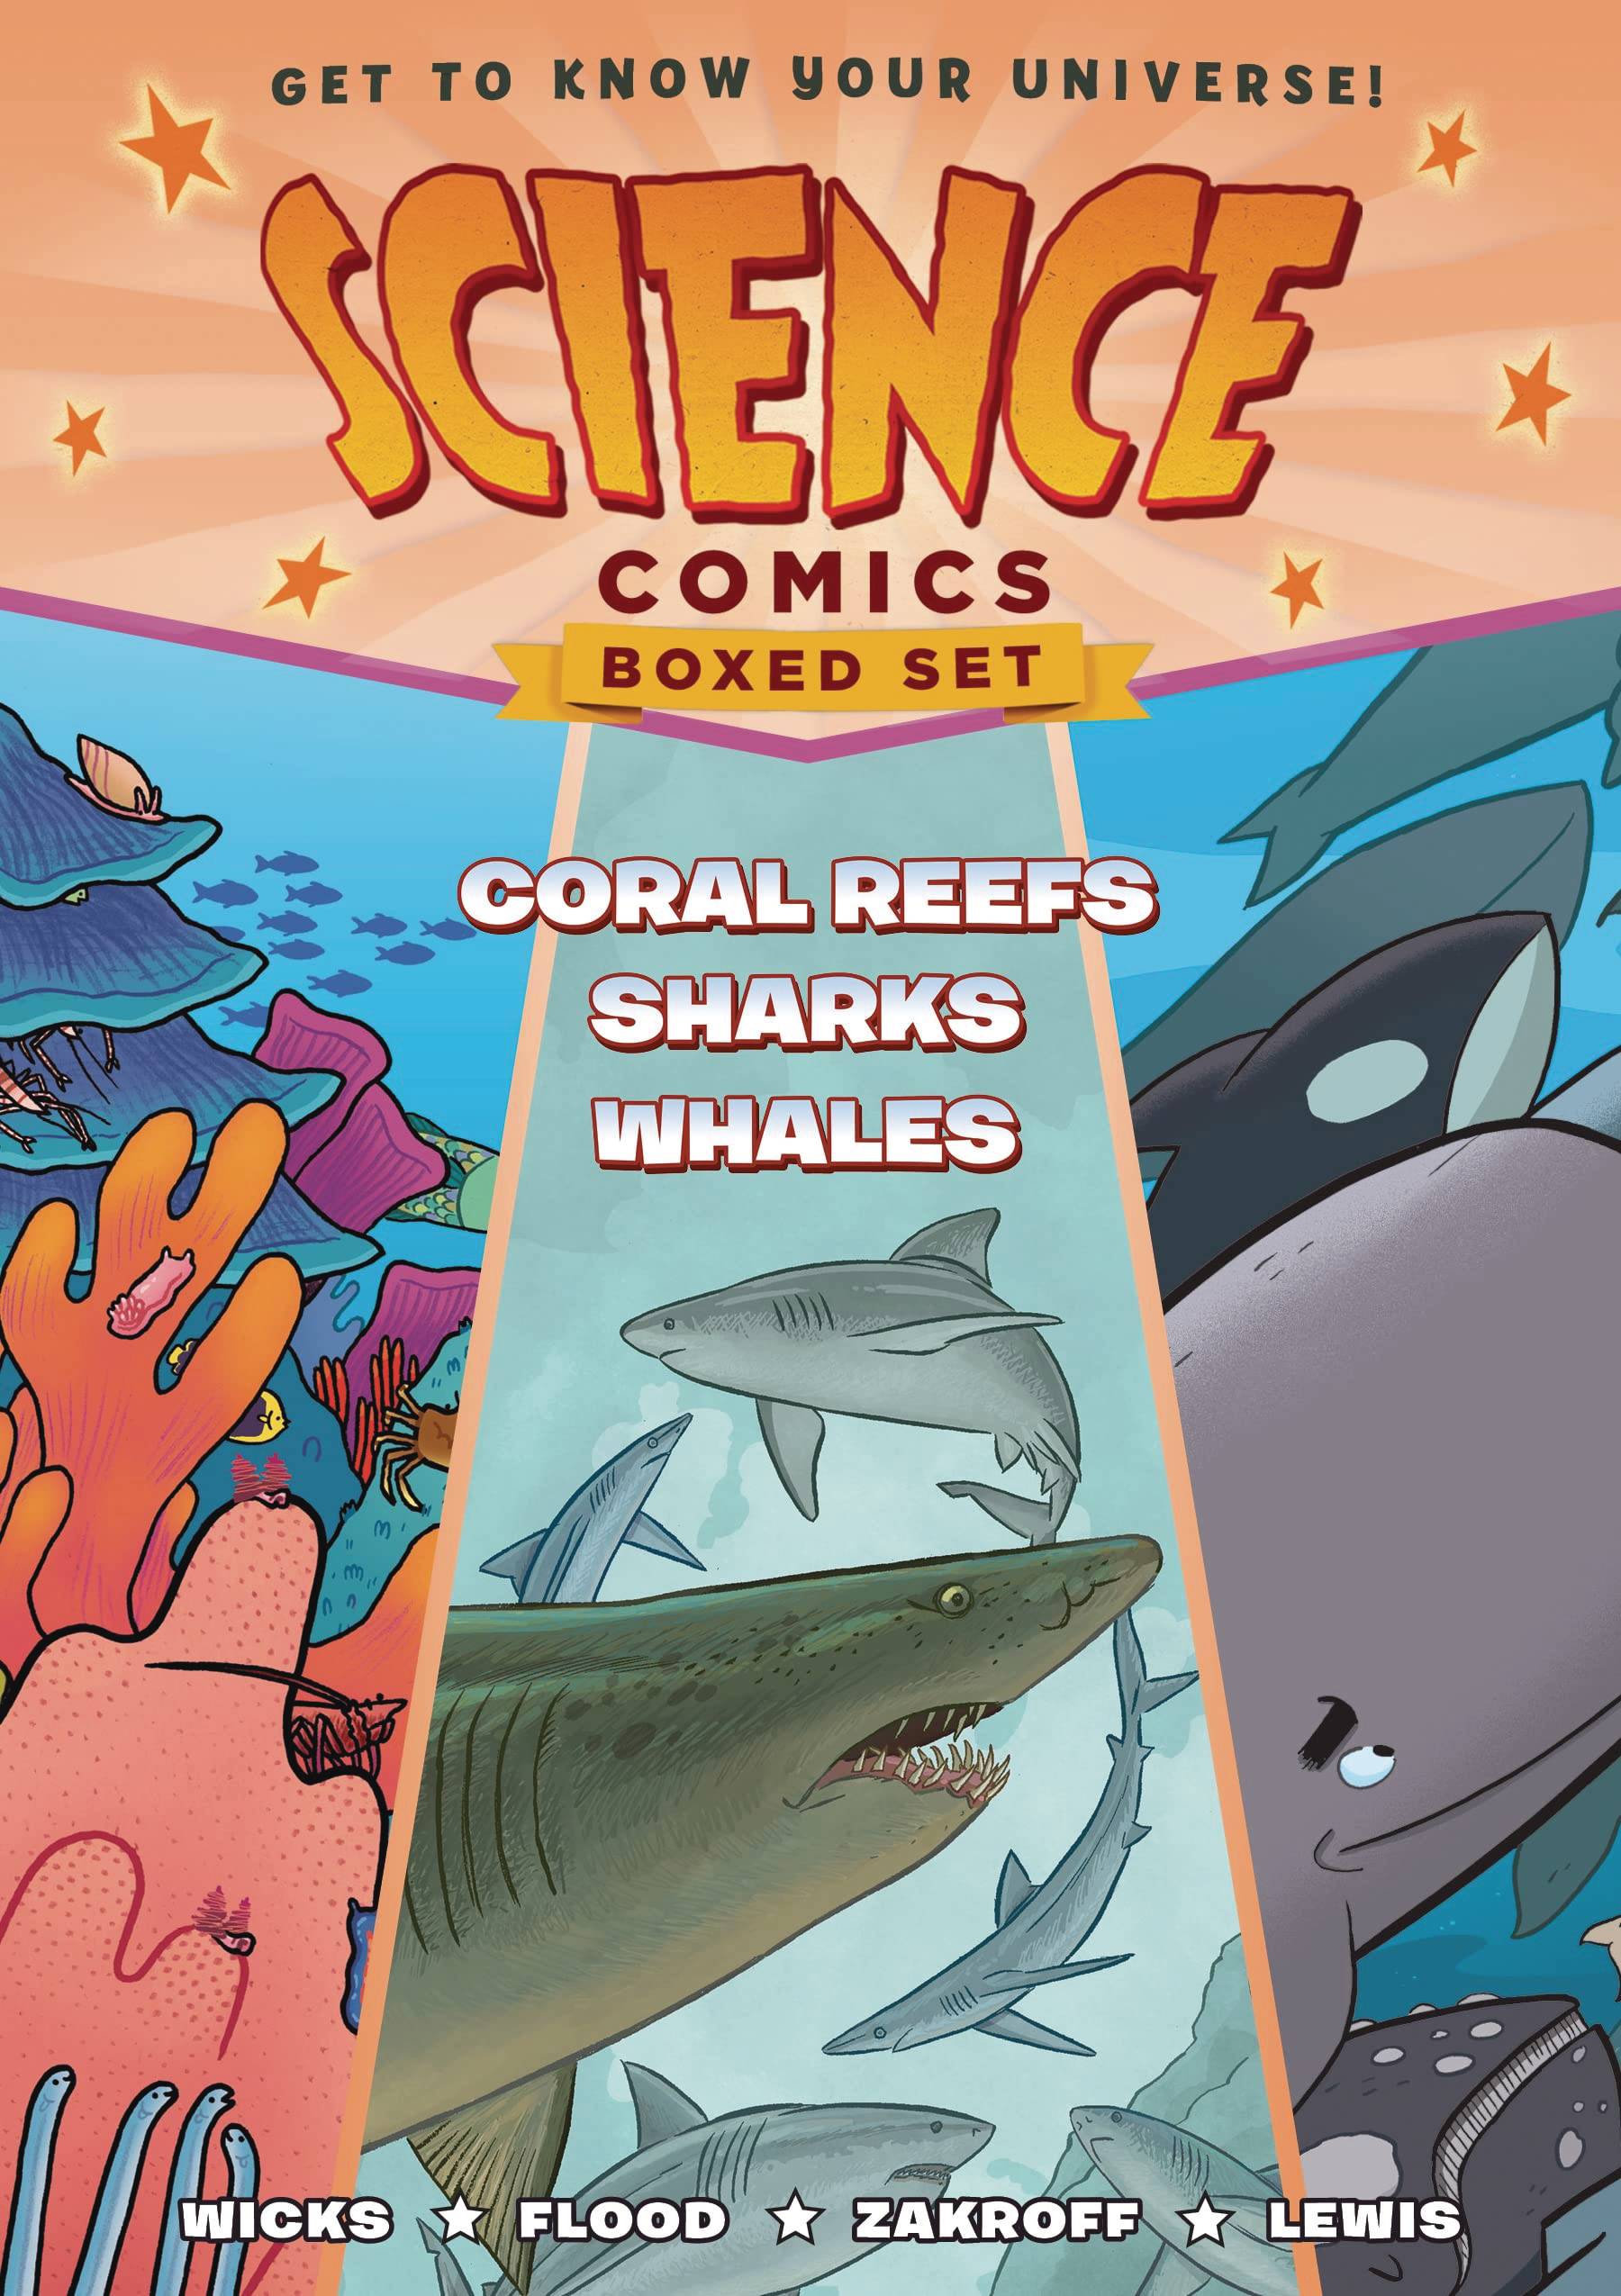 SCIENCE COMICS BOXED SET CORAL REEFS SHARKS WHALES